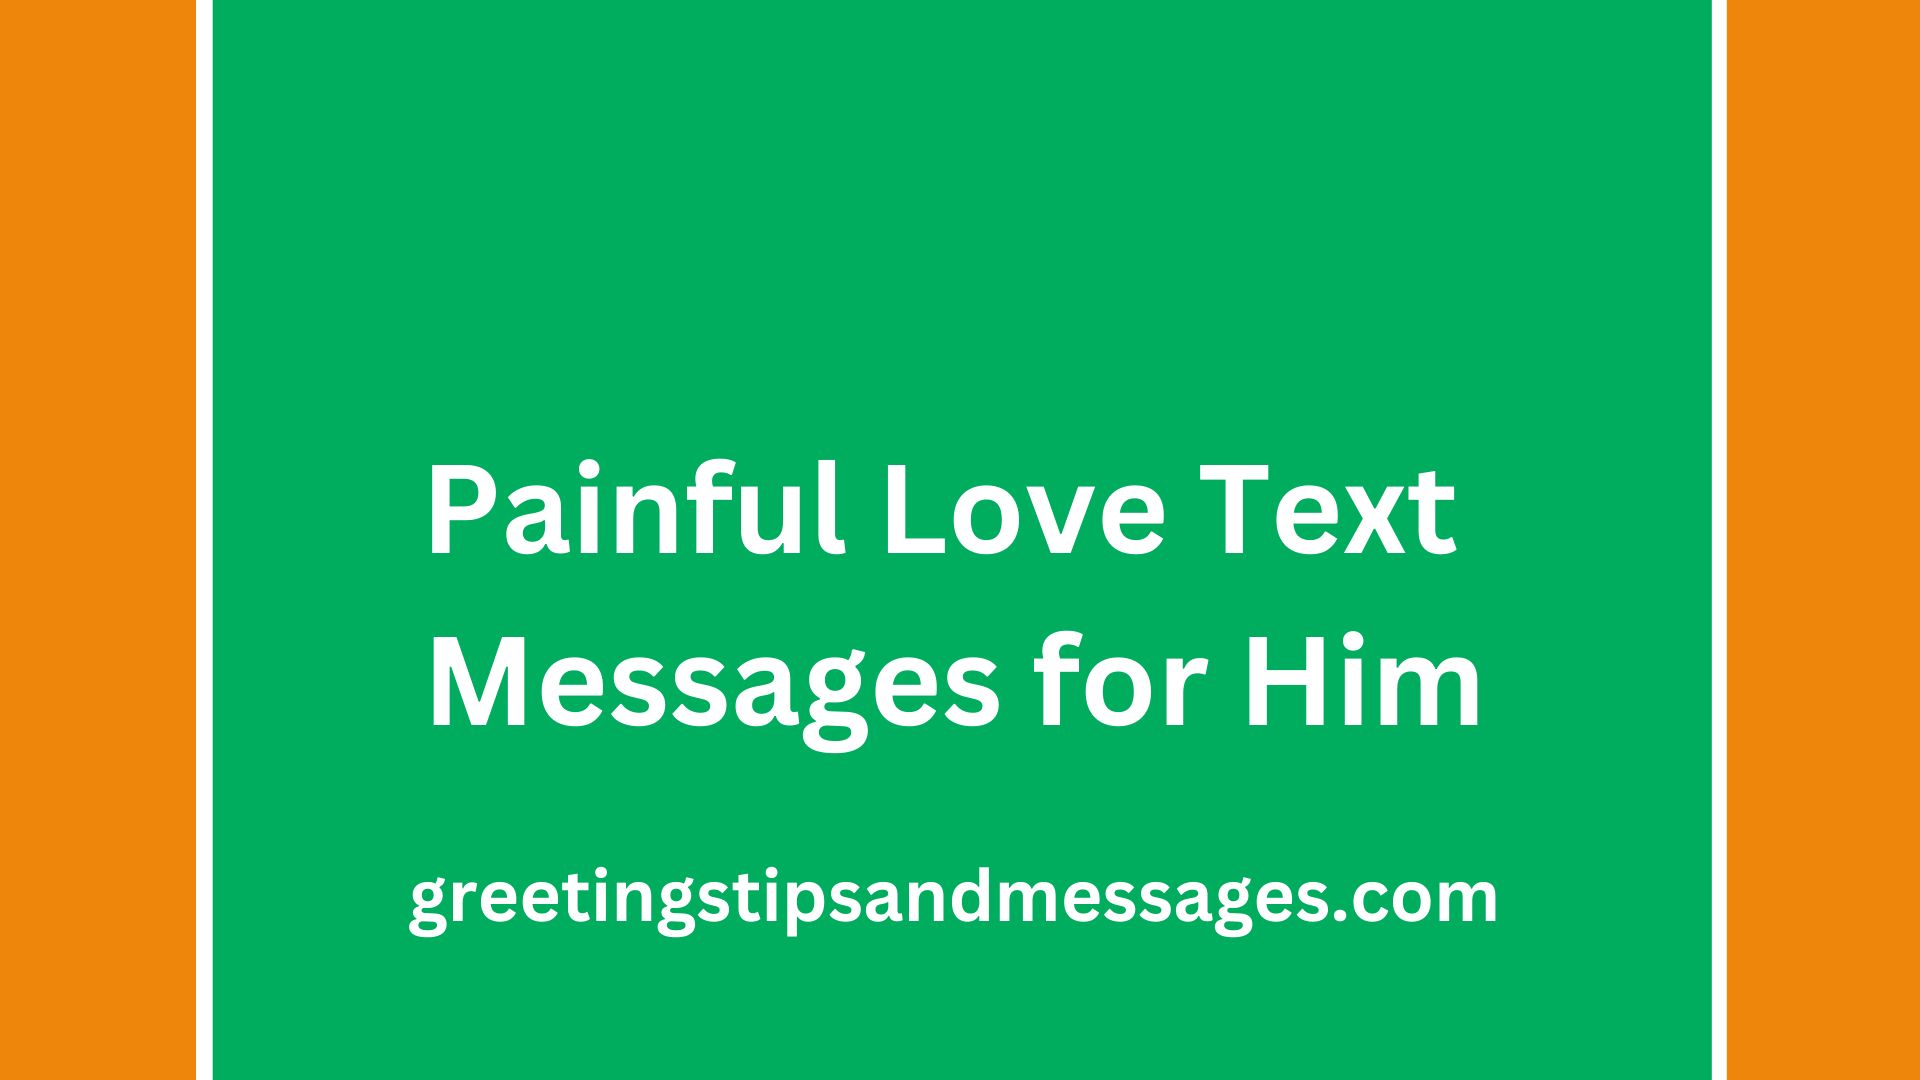 Painful Love Text Messages for Him